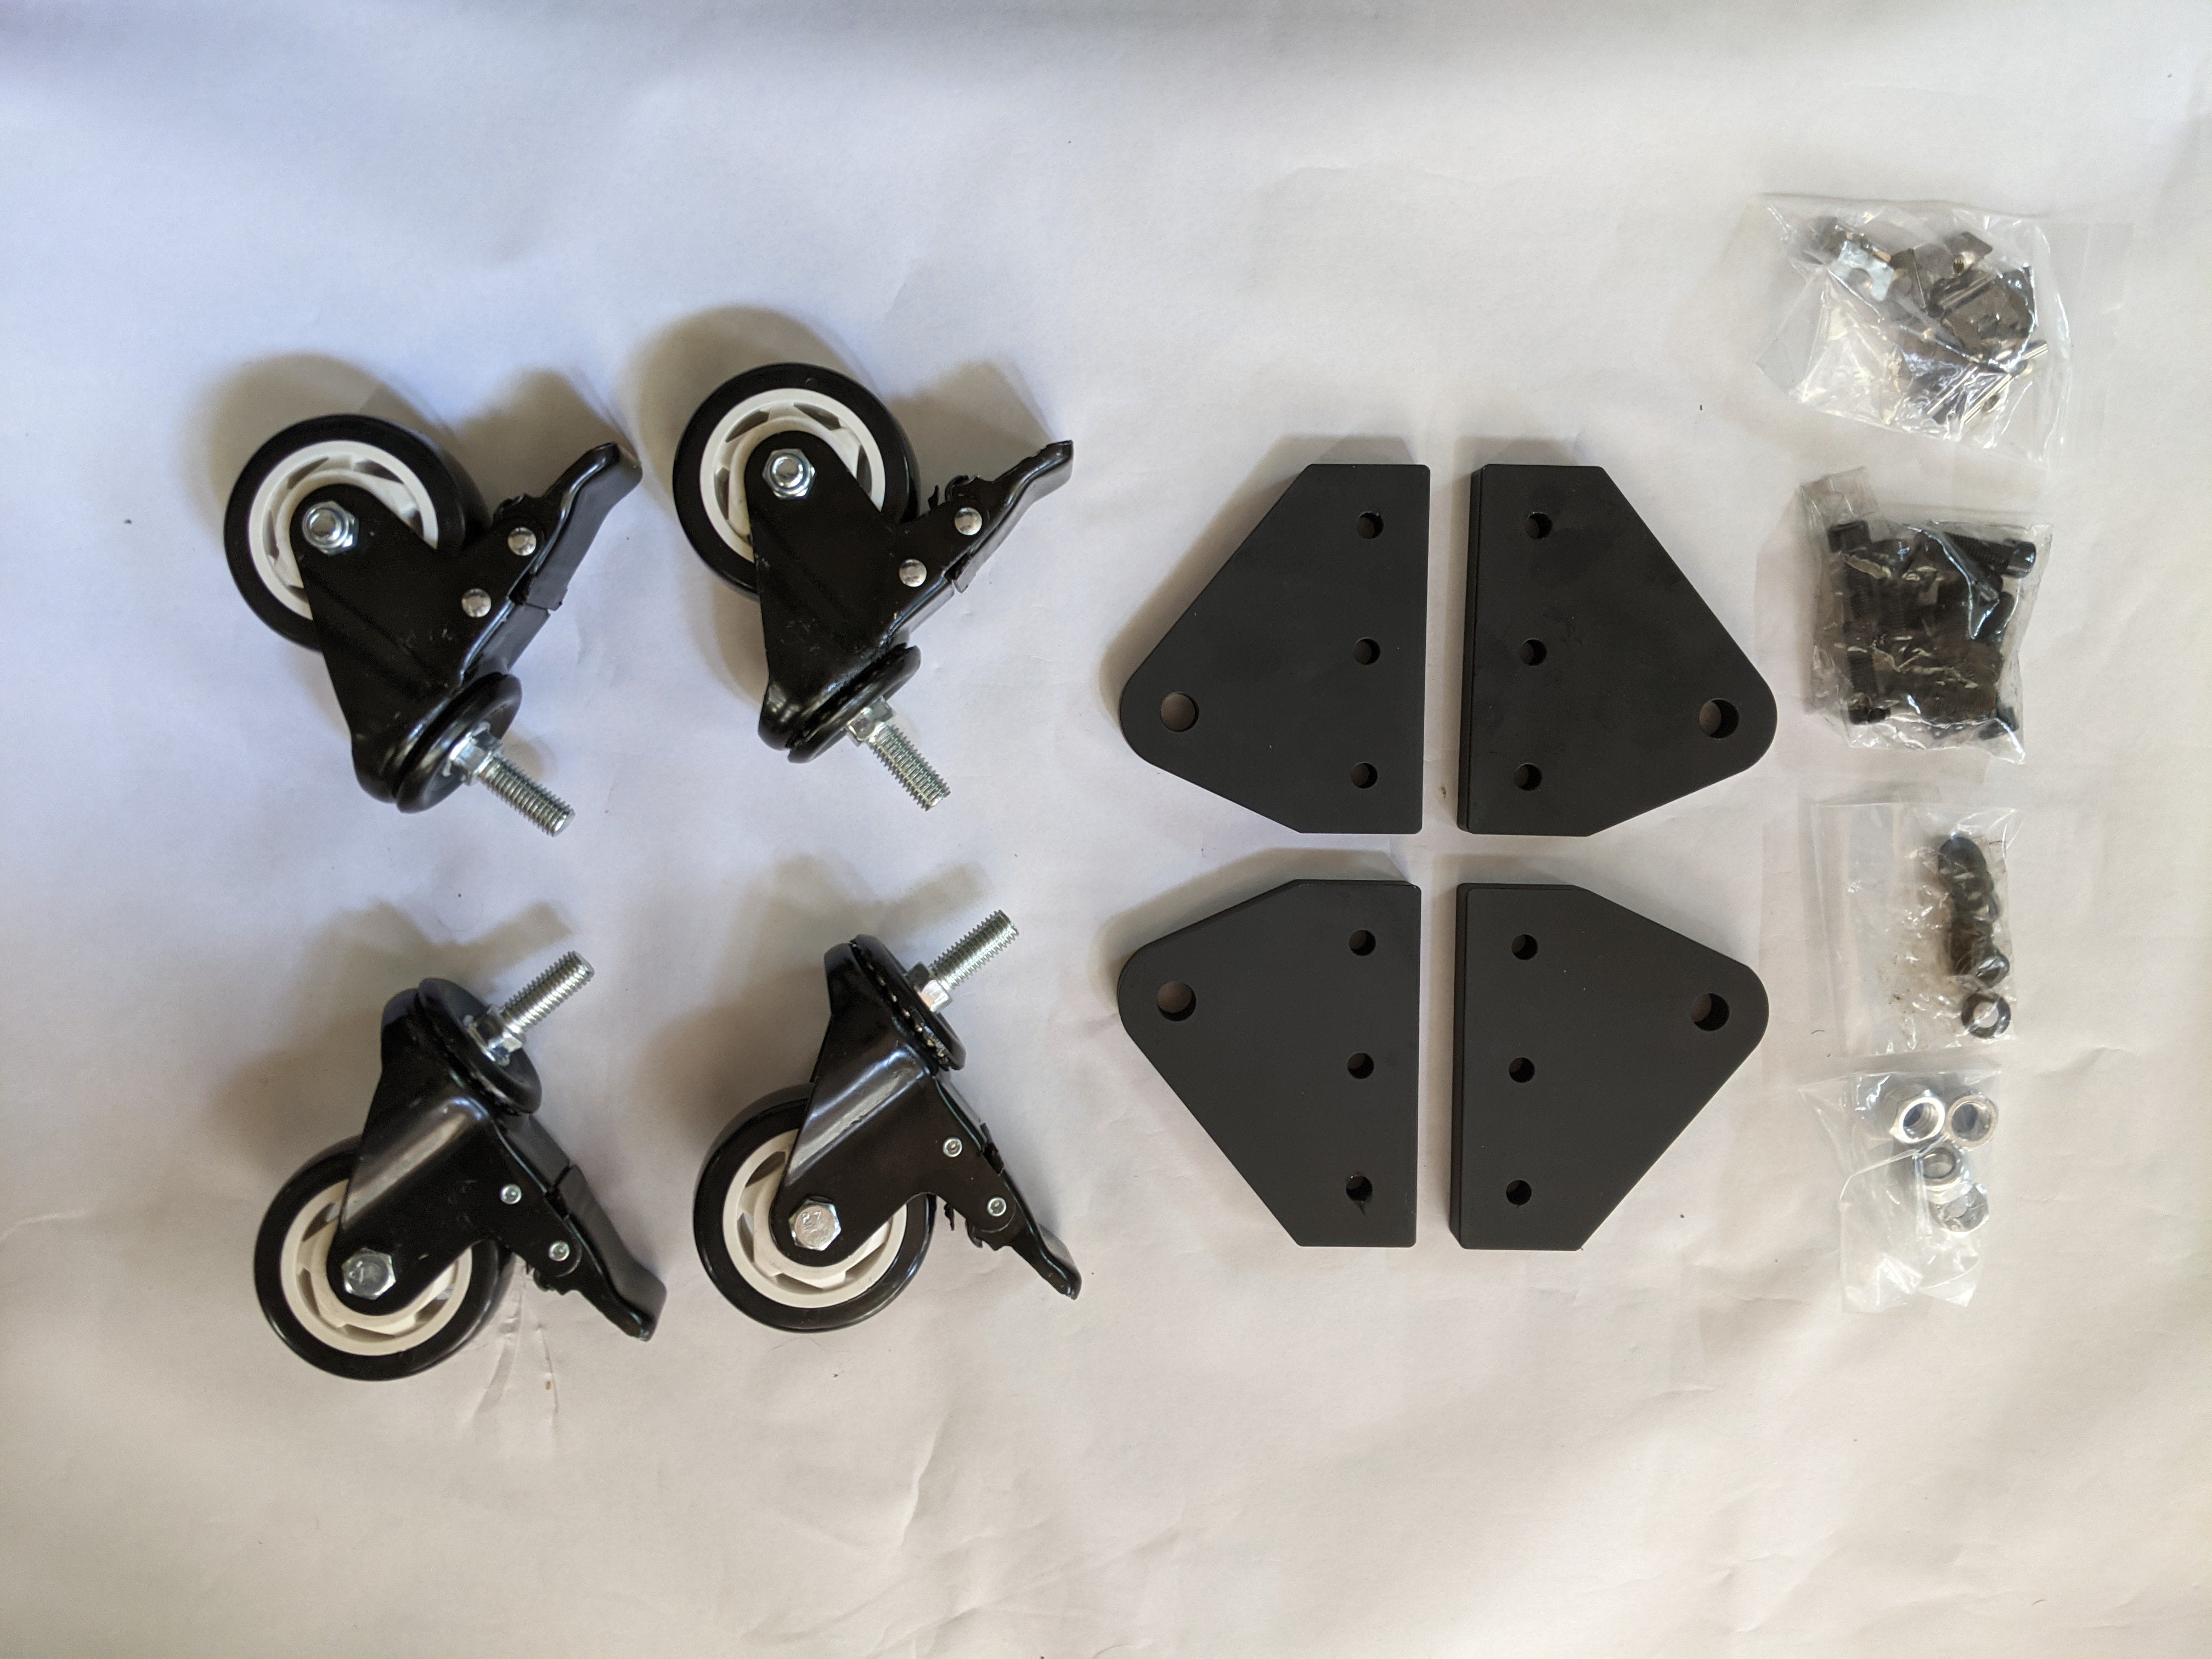 Wheel / Caster Bare Set - CASTERS NOT INCLUDED